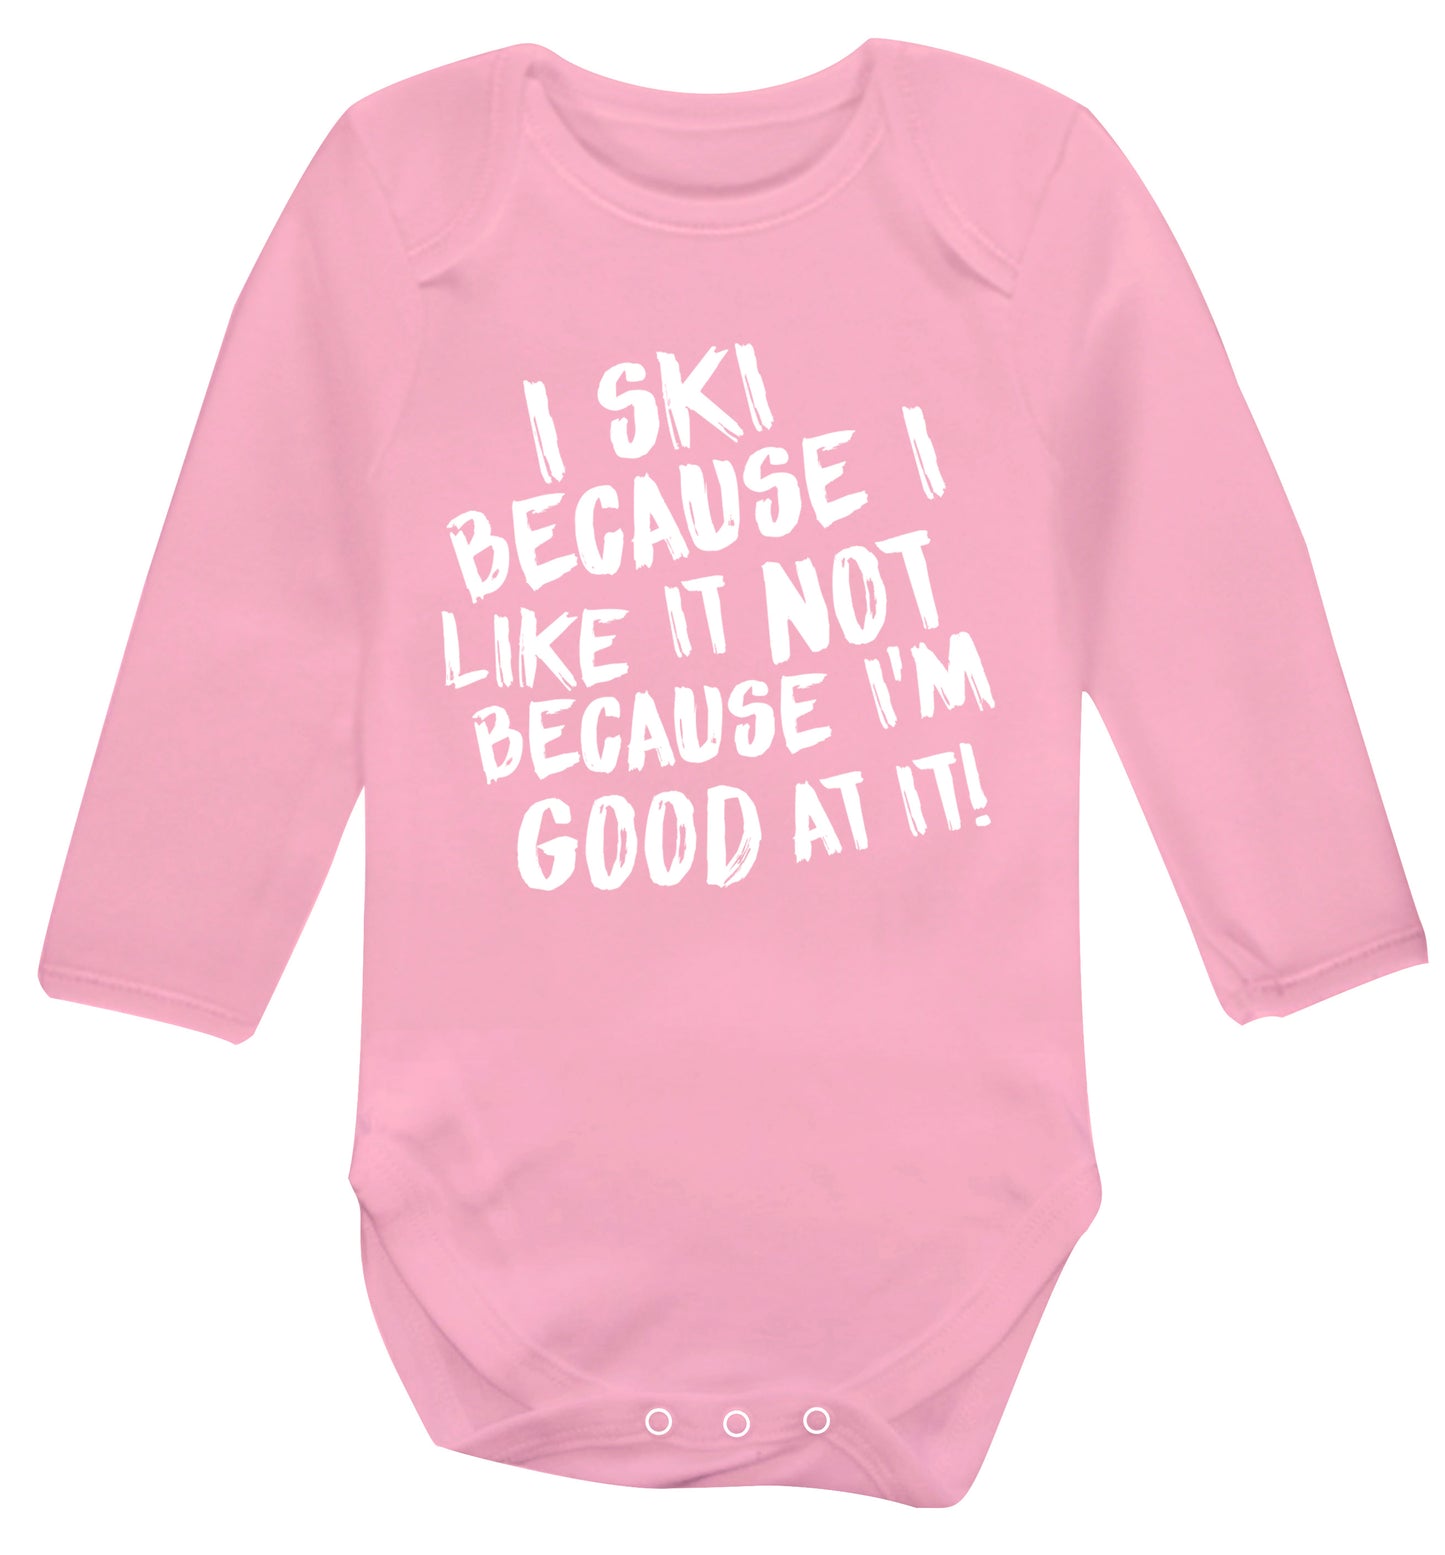 I ski because I like it not because I'm good at it Baby Vest long sleeved pale pink 6-12 months